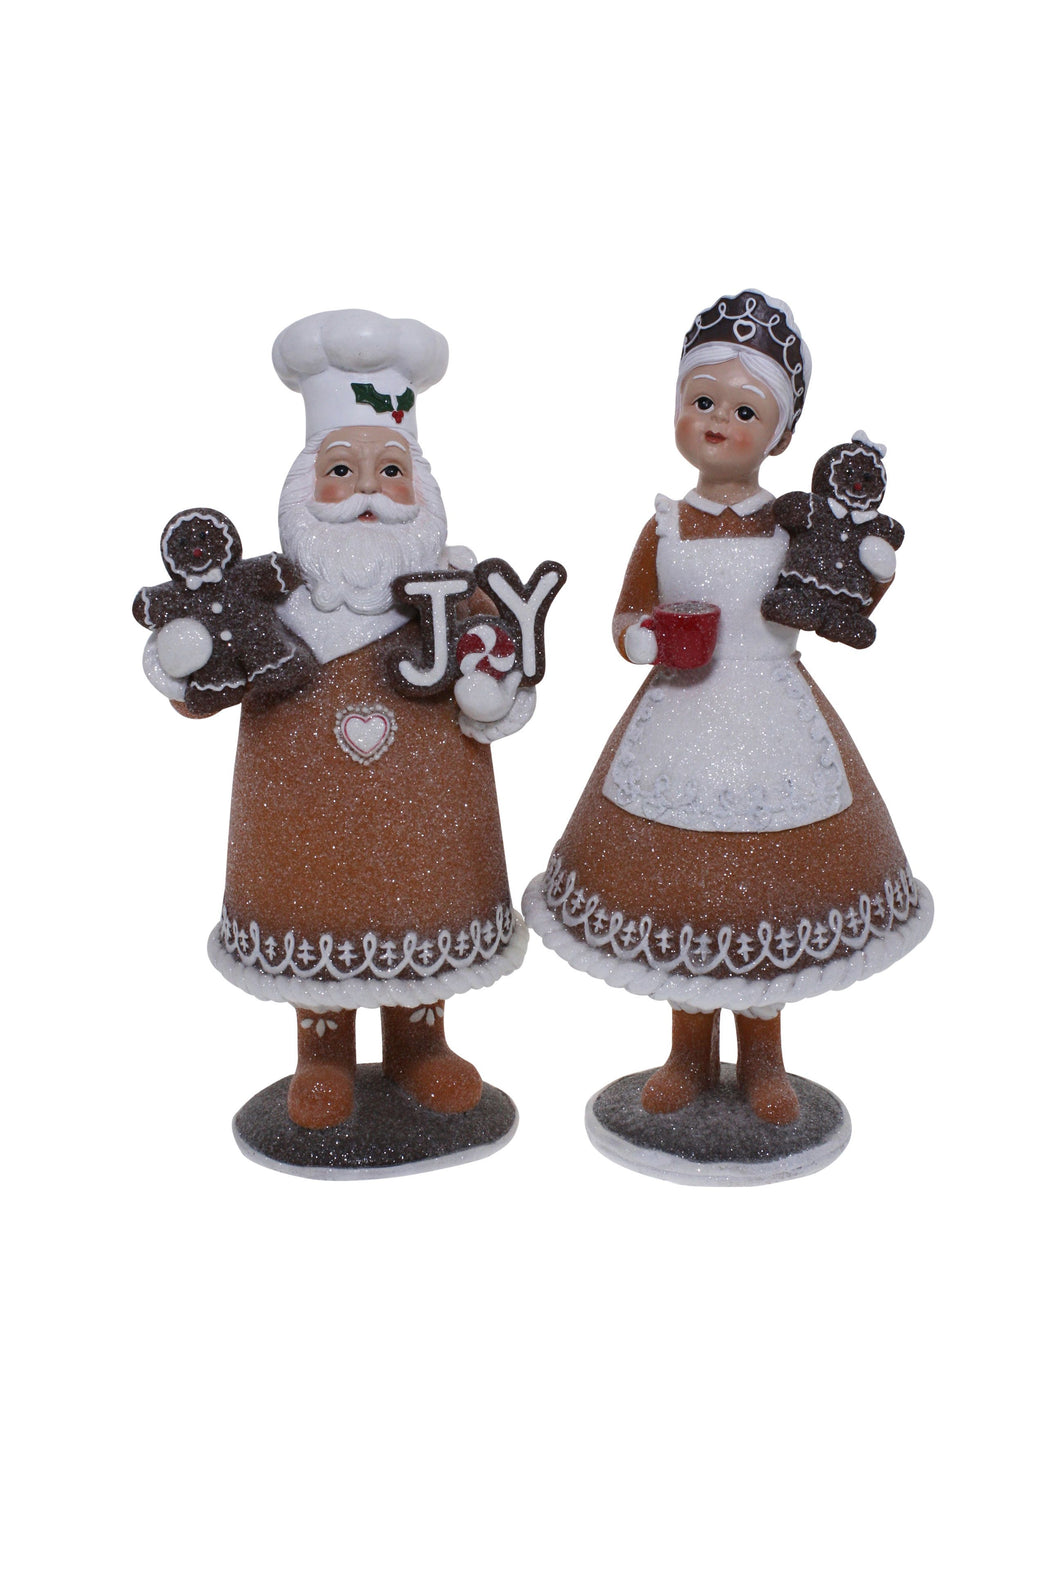 Gingerbread Mr and Mrs Claus - 2 Assorted